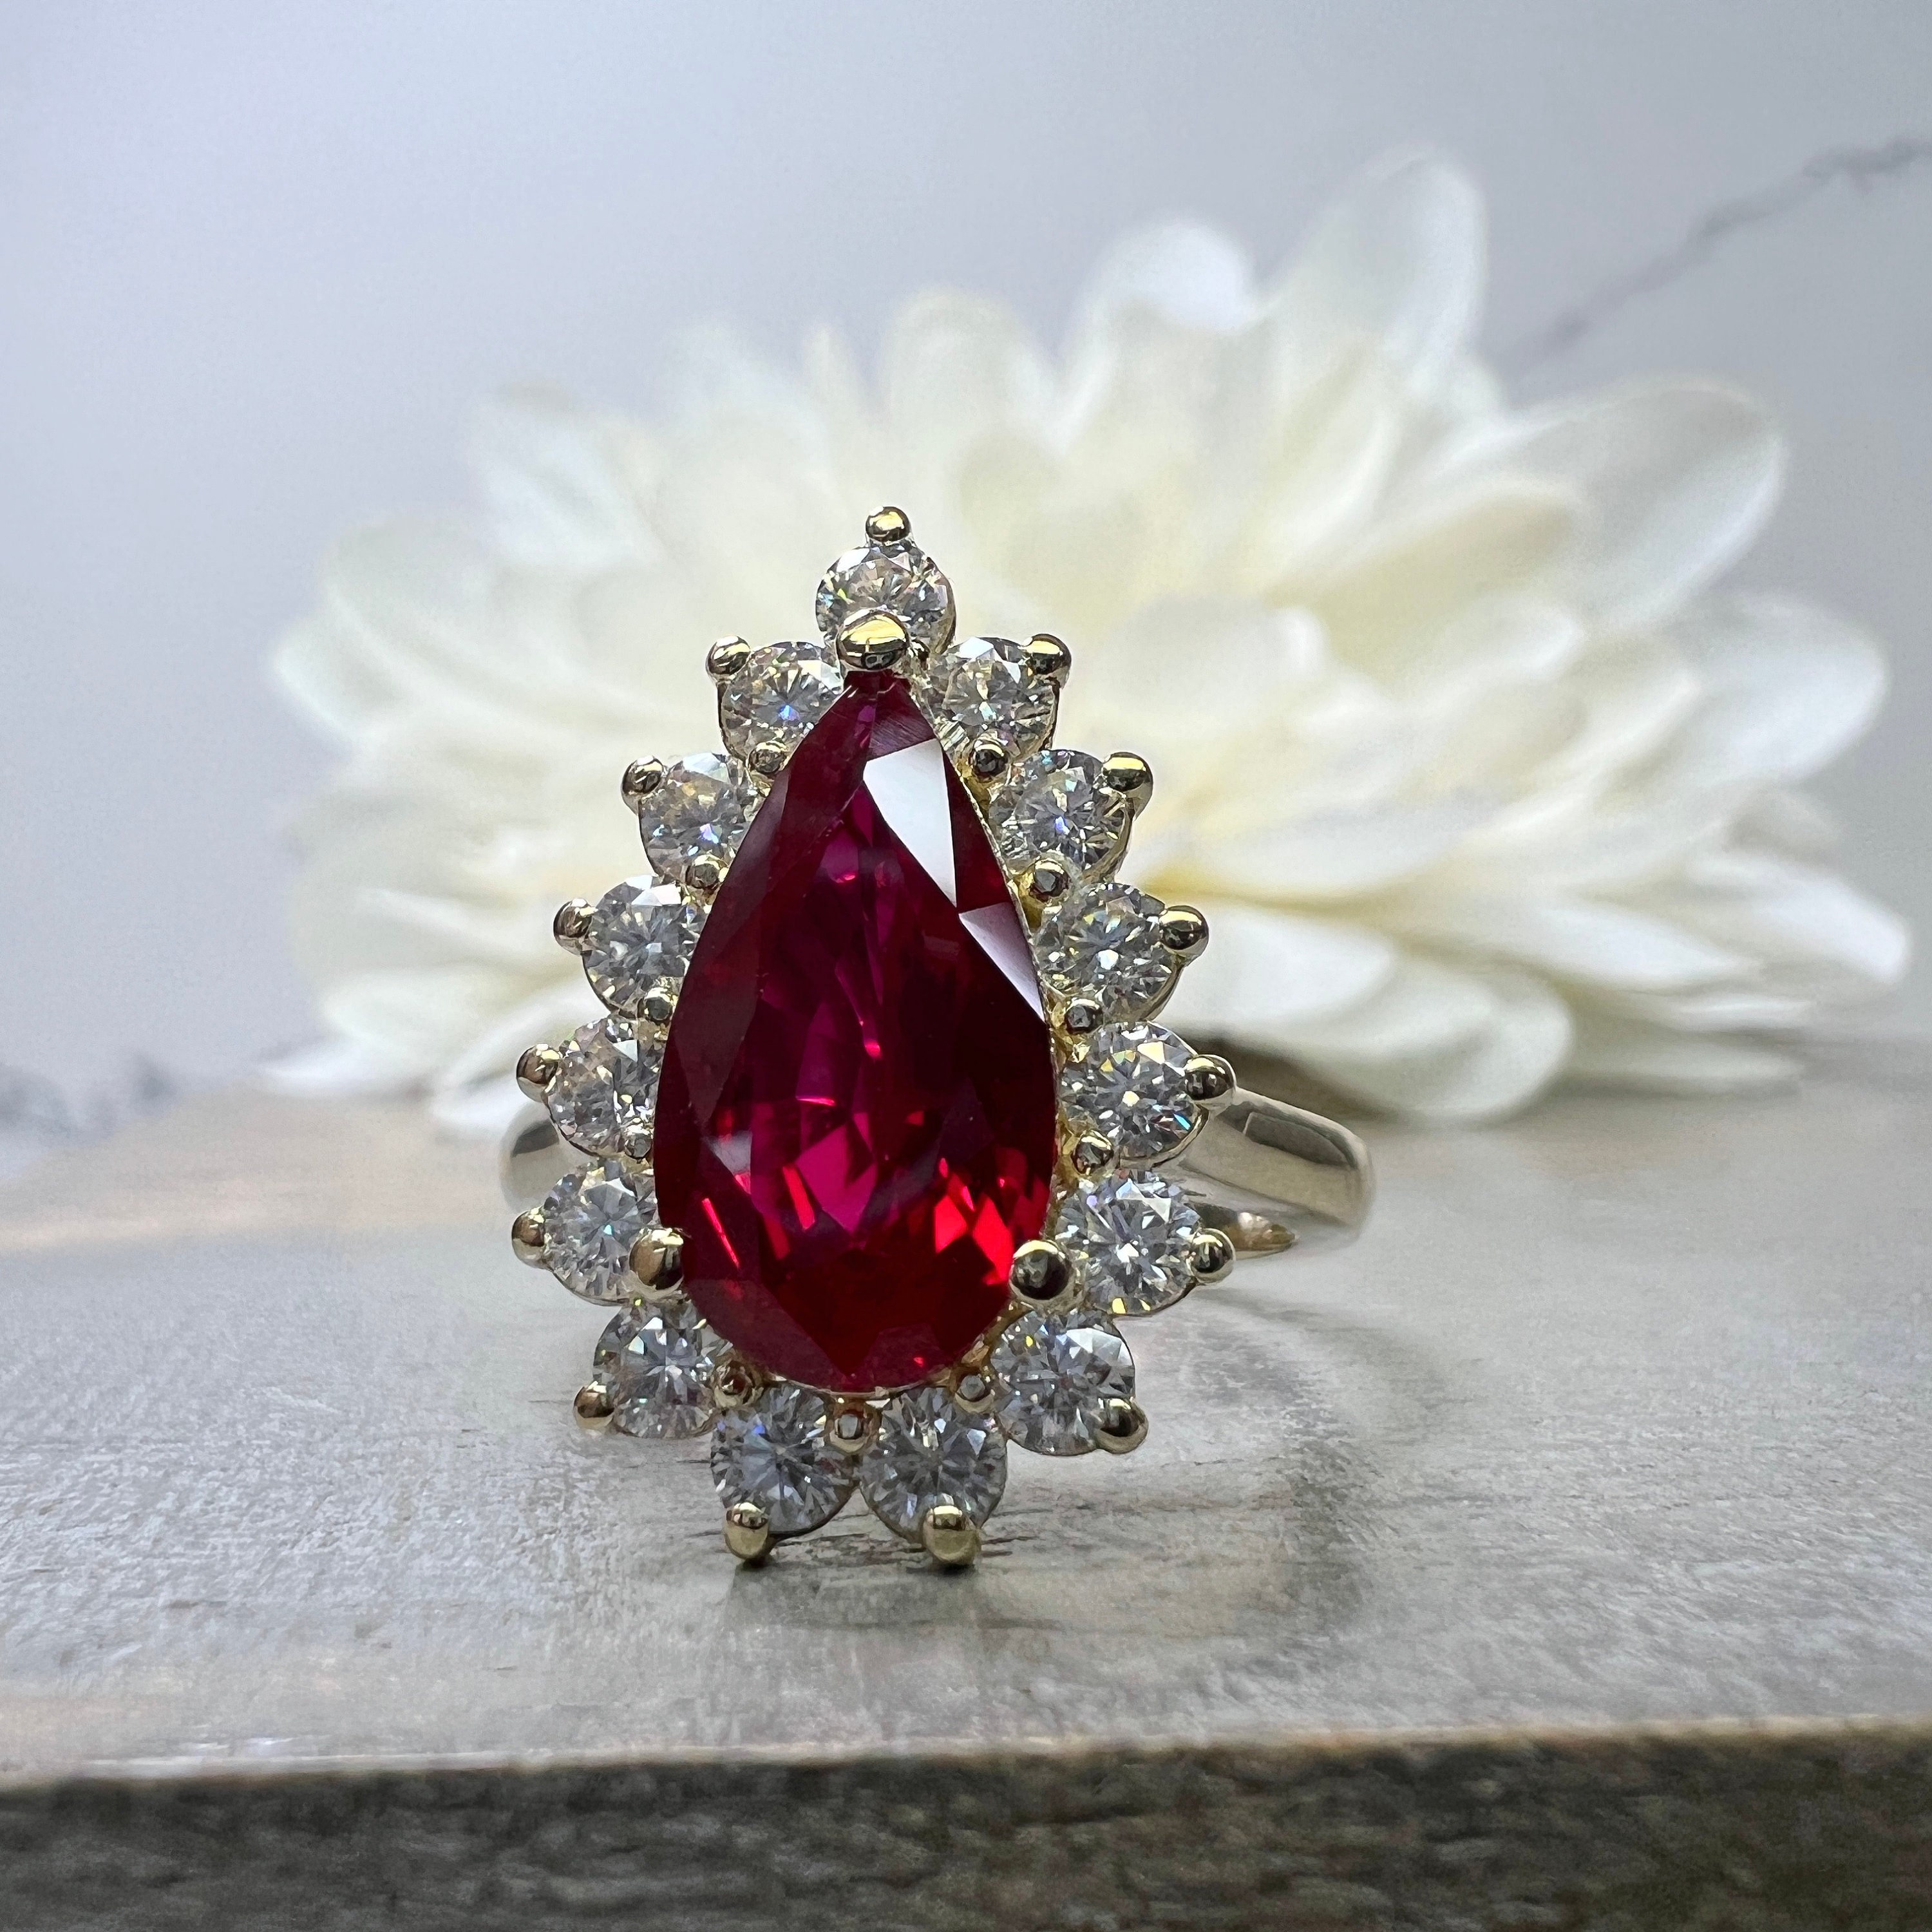 Solitaire Pear Cut Ruby Ring Sterling Silver